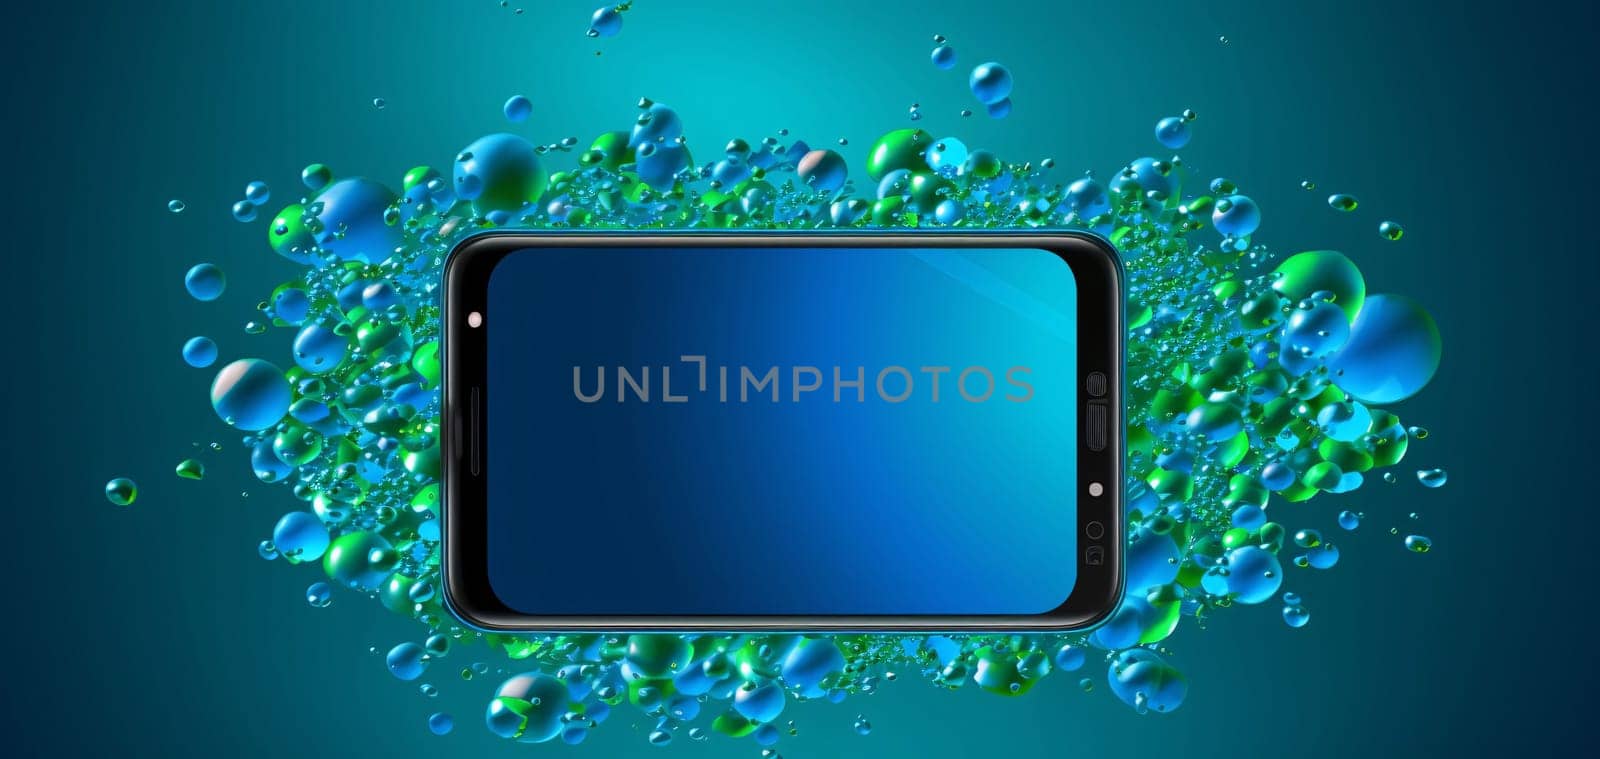 Smartphone screen: Smartphone with a blue screen on a background of water drops.